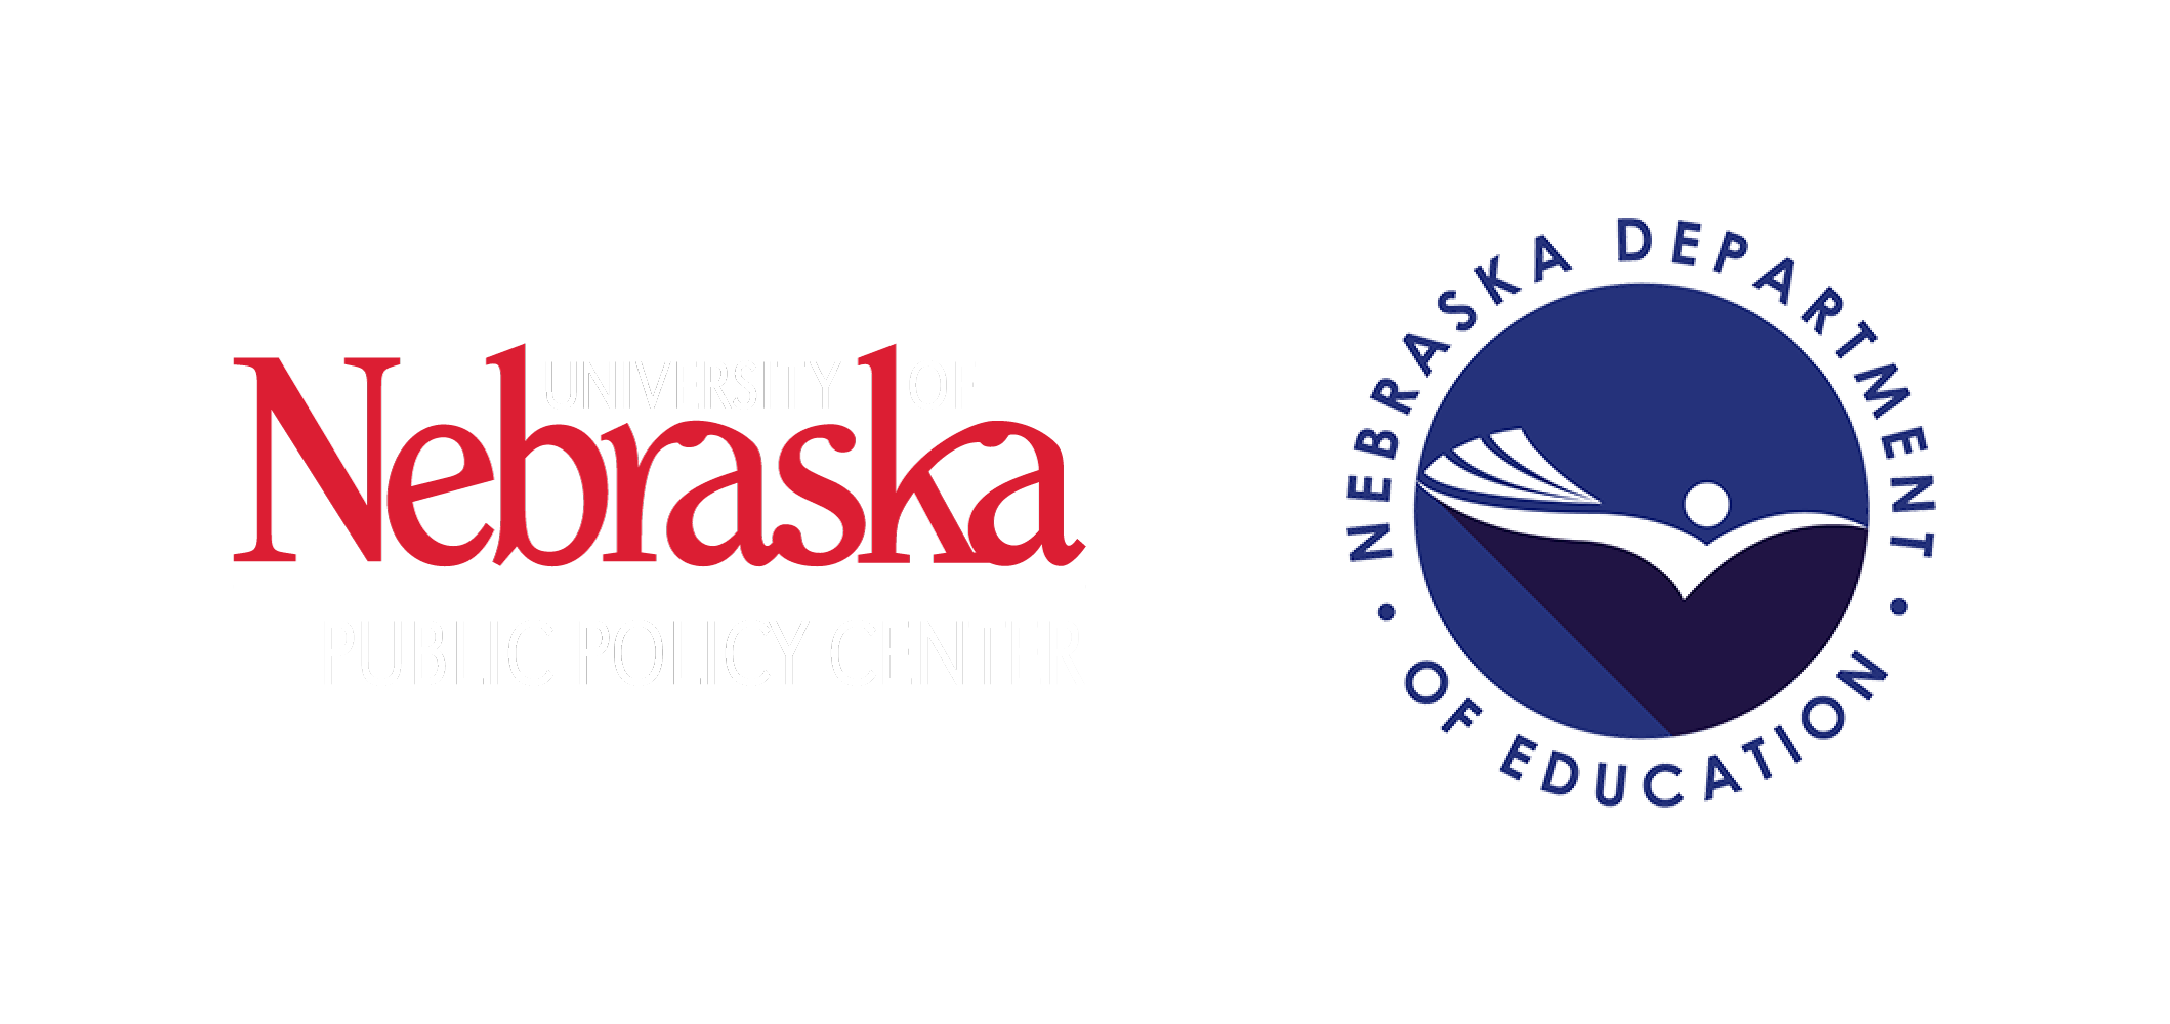 Public Policy Center and Nebraska Department of Education Logos